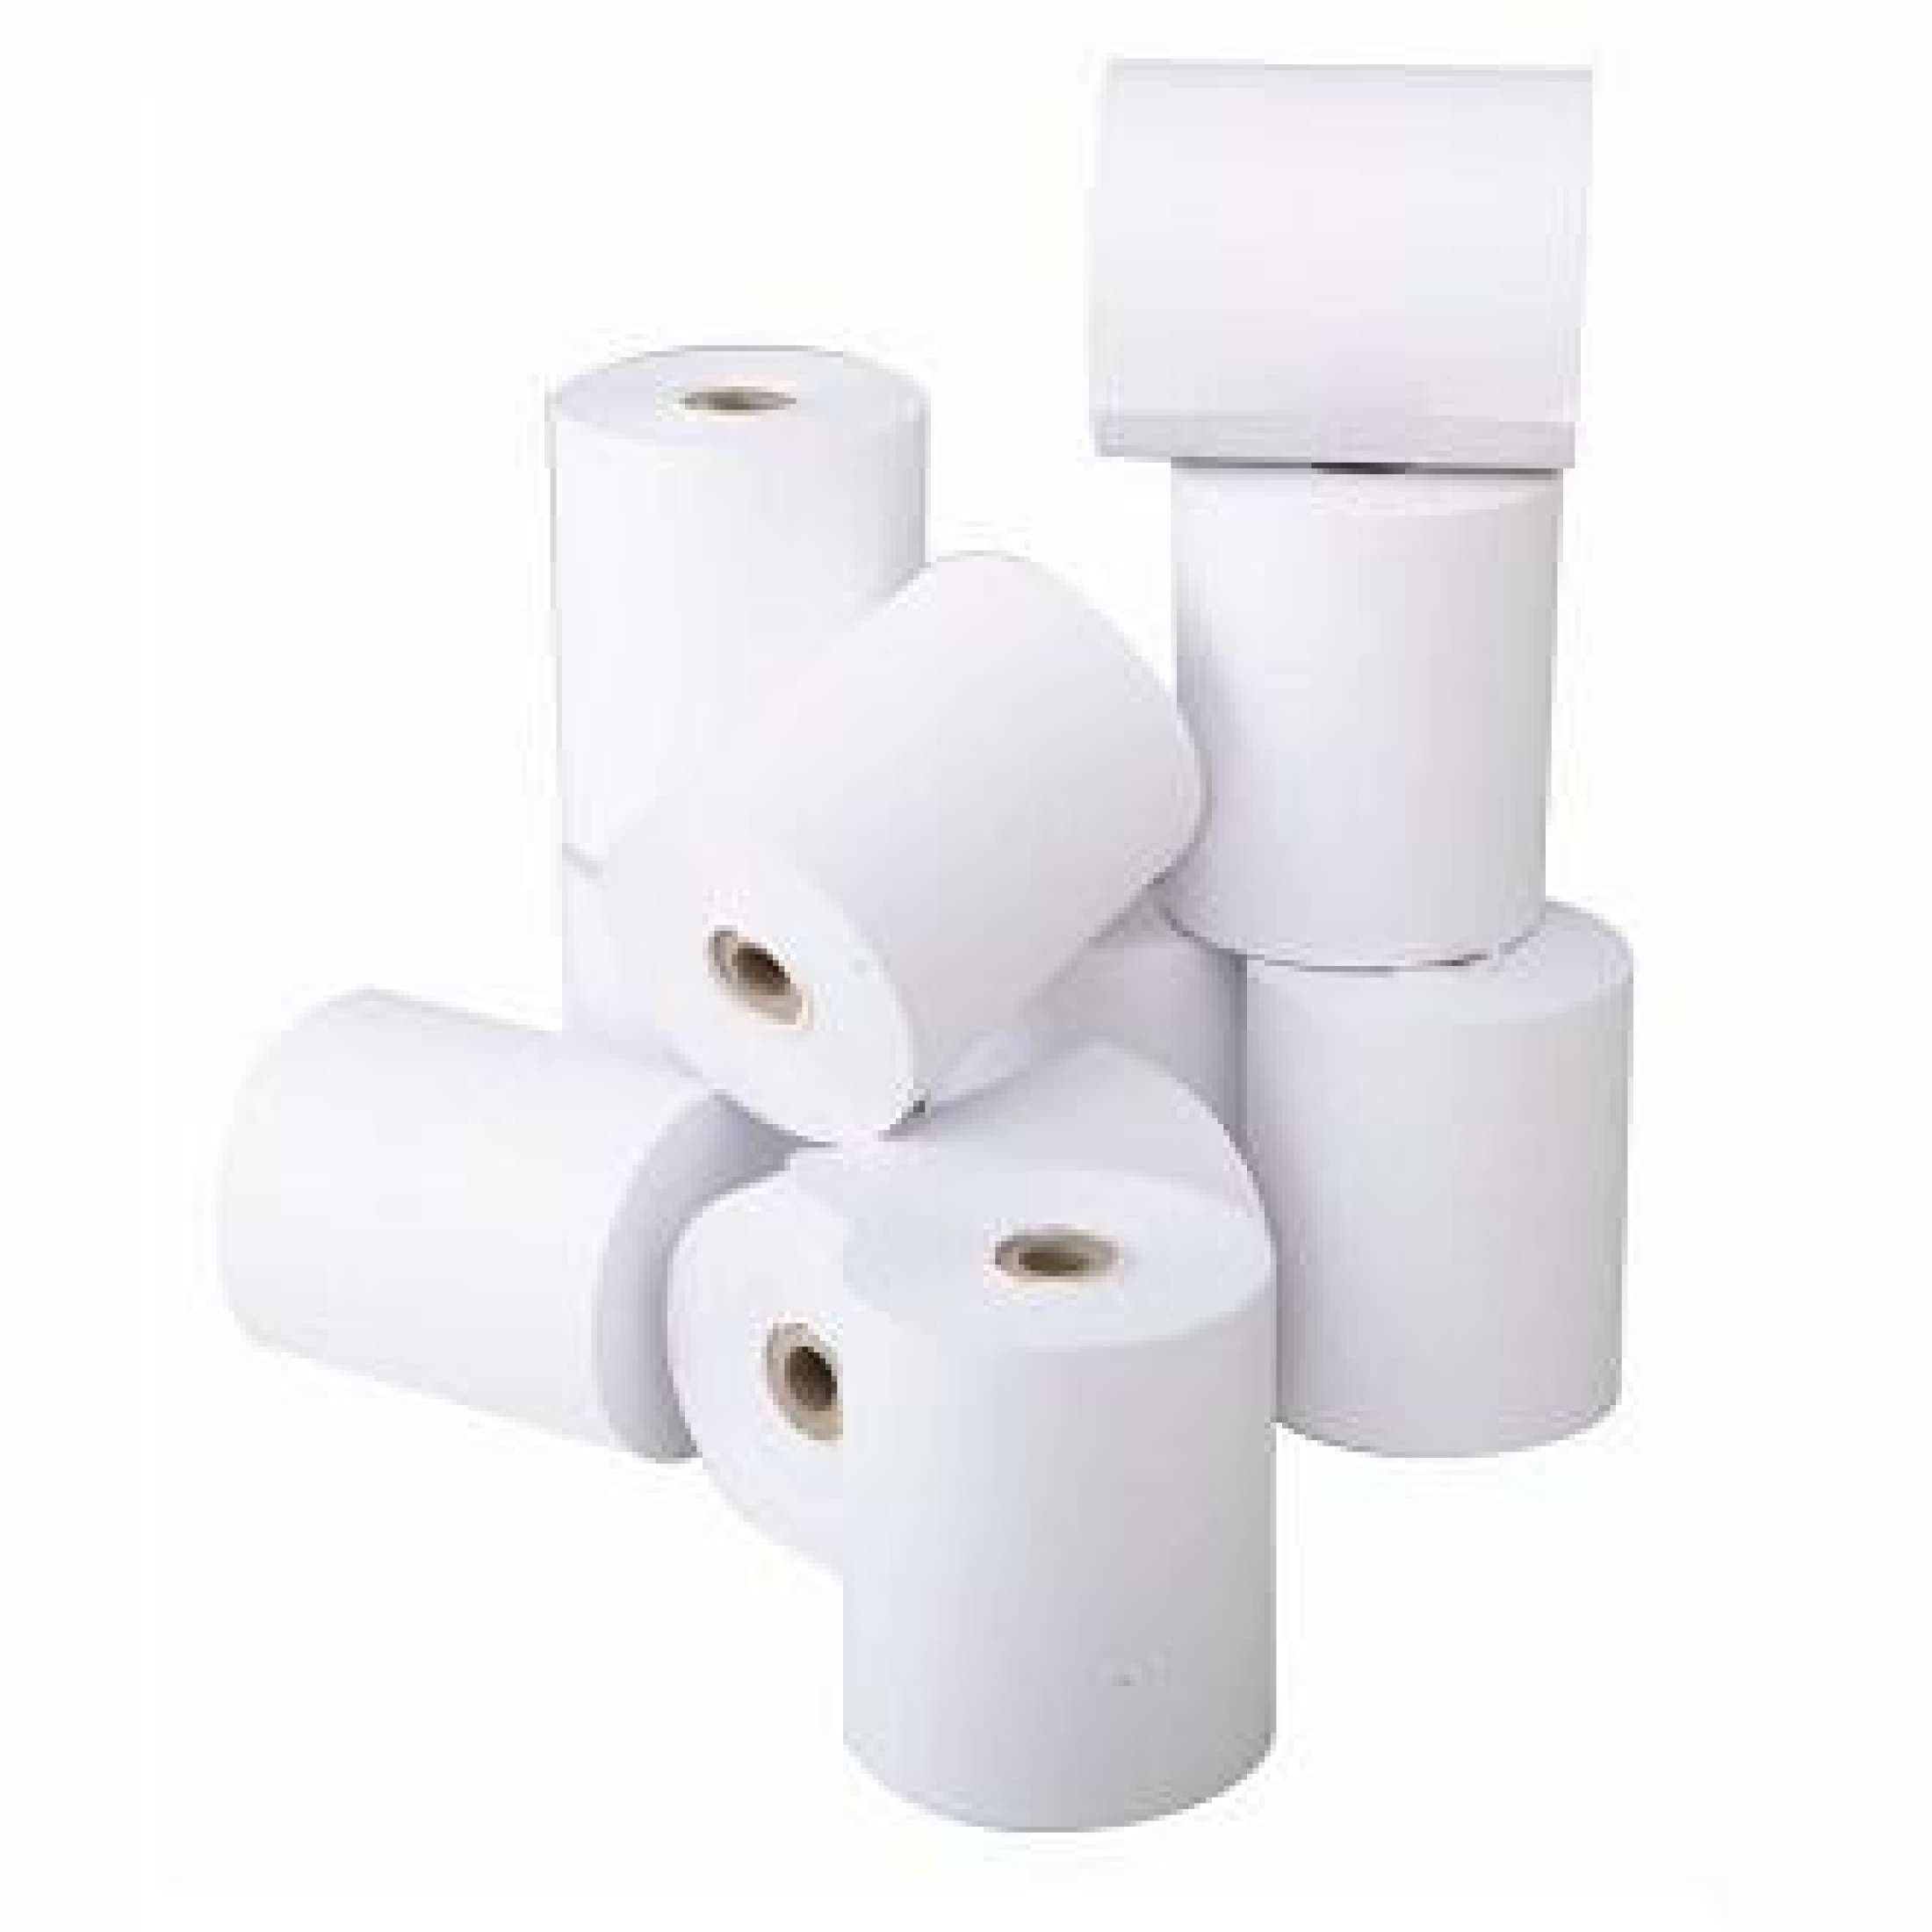 Thermal Roll 3X3 (35M) - White Single Piece